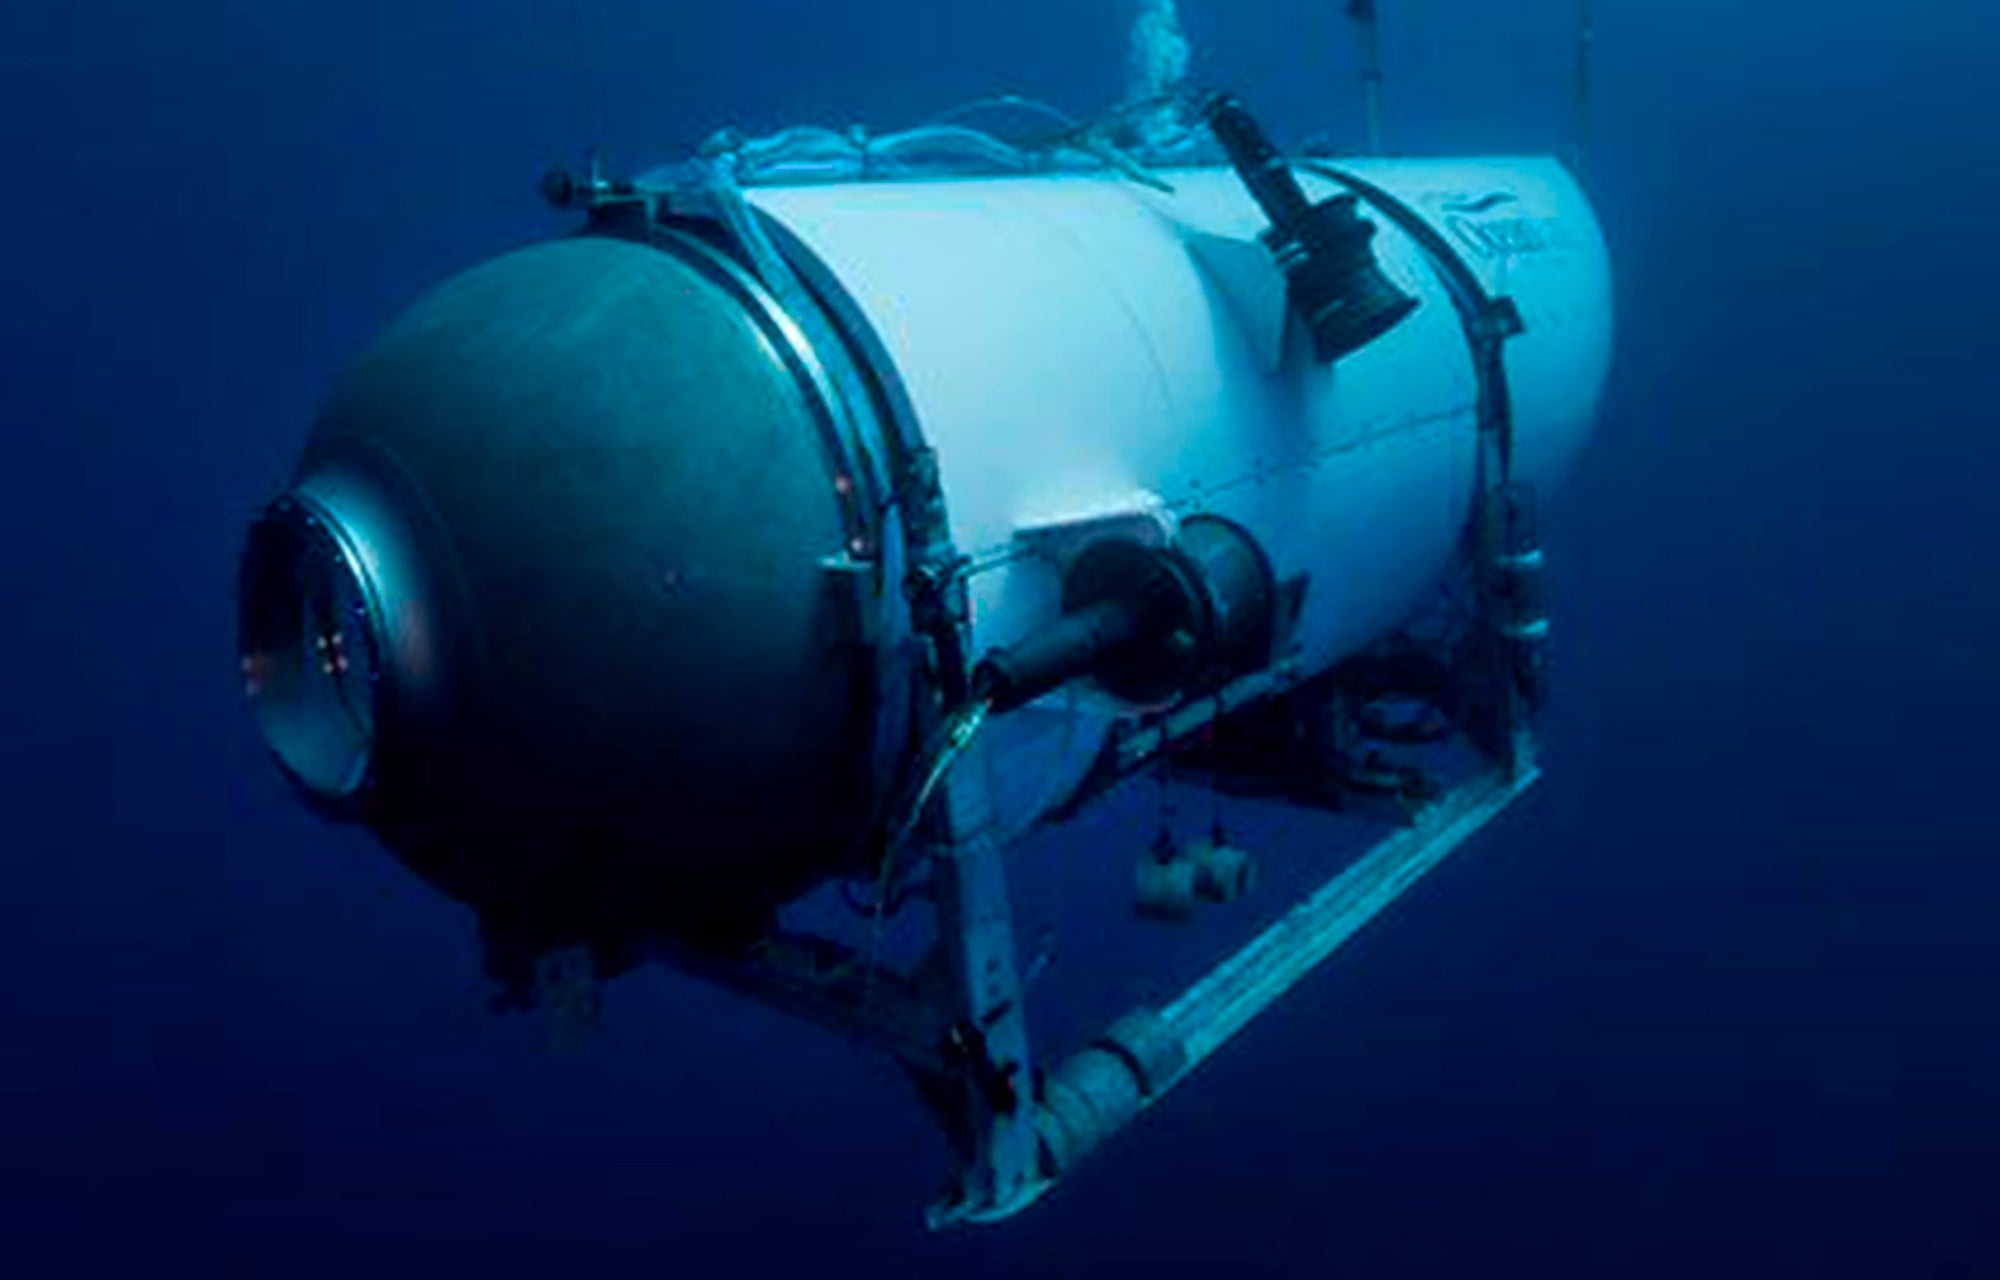 The Titan submersible was “experimental” and had no safety accreditation